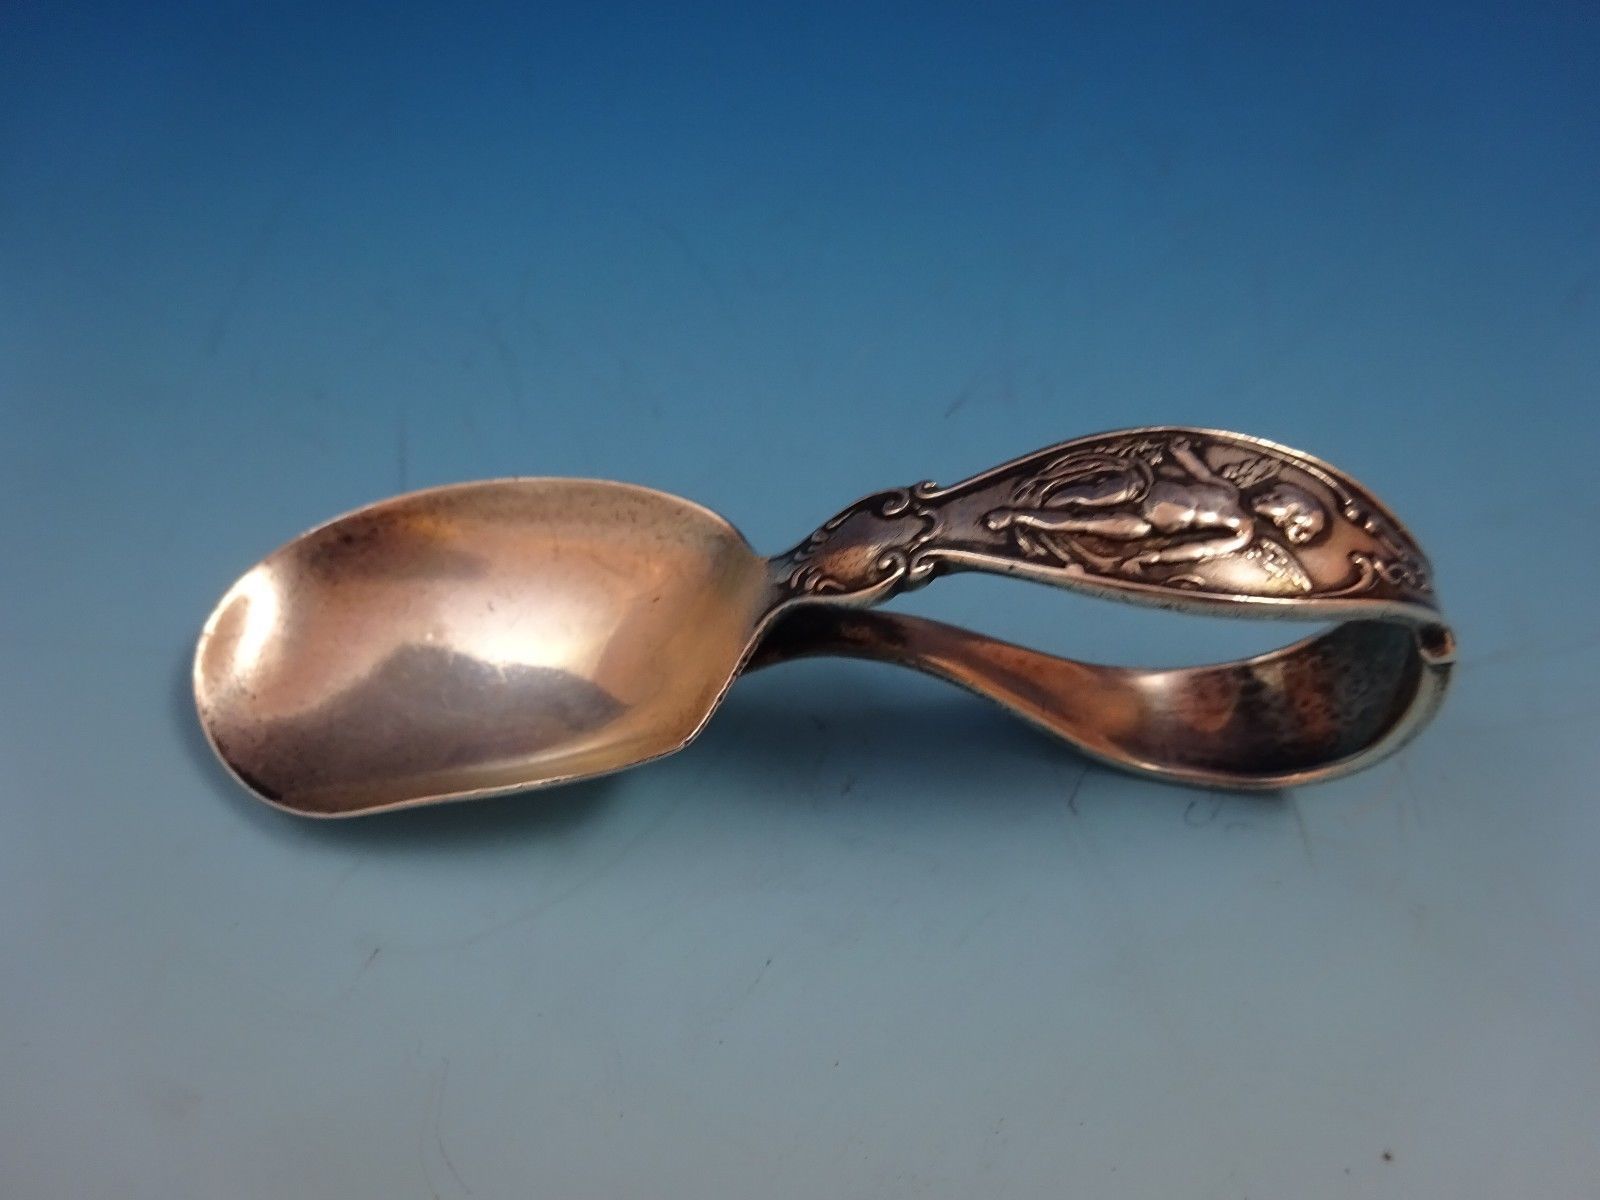 curved handle baby spoon